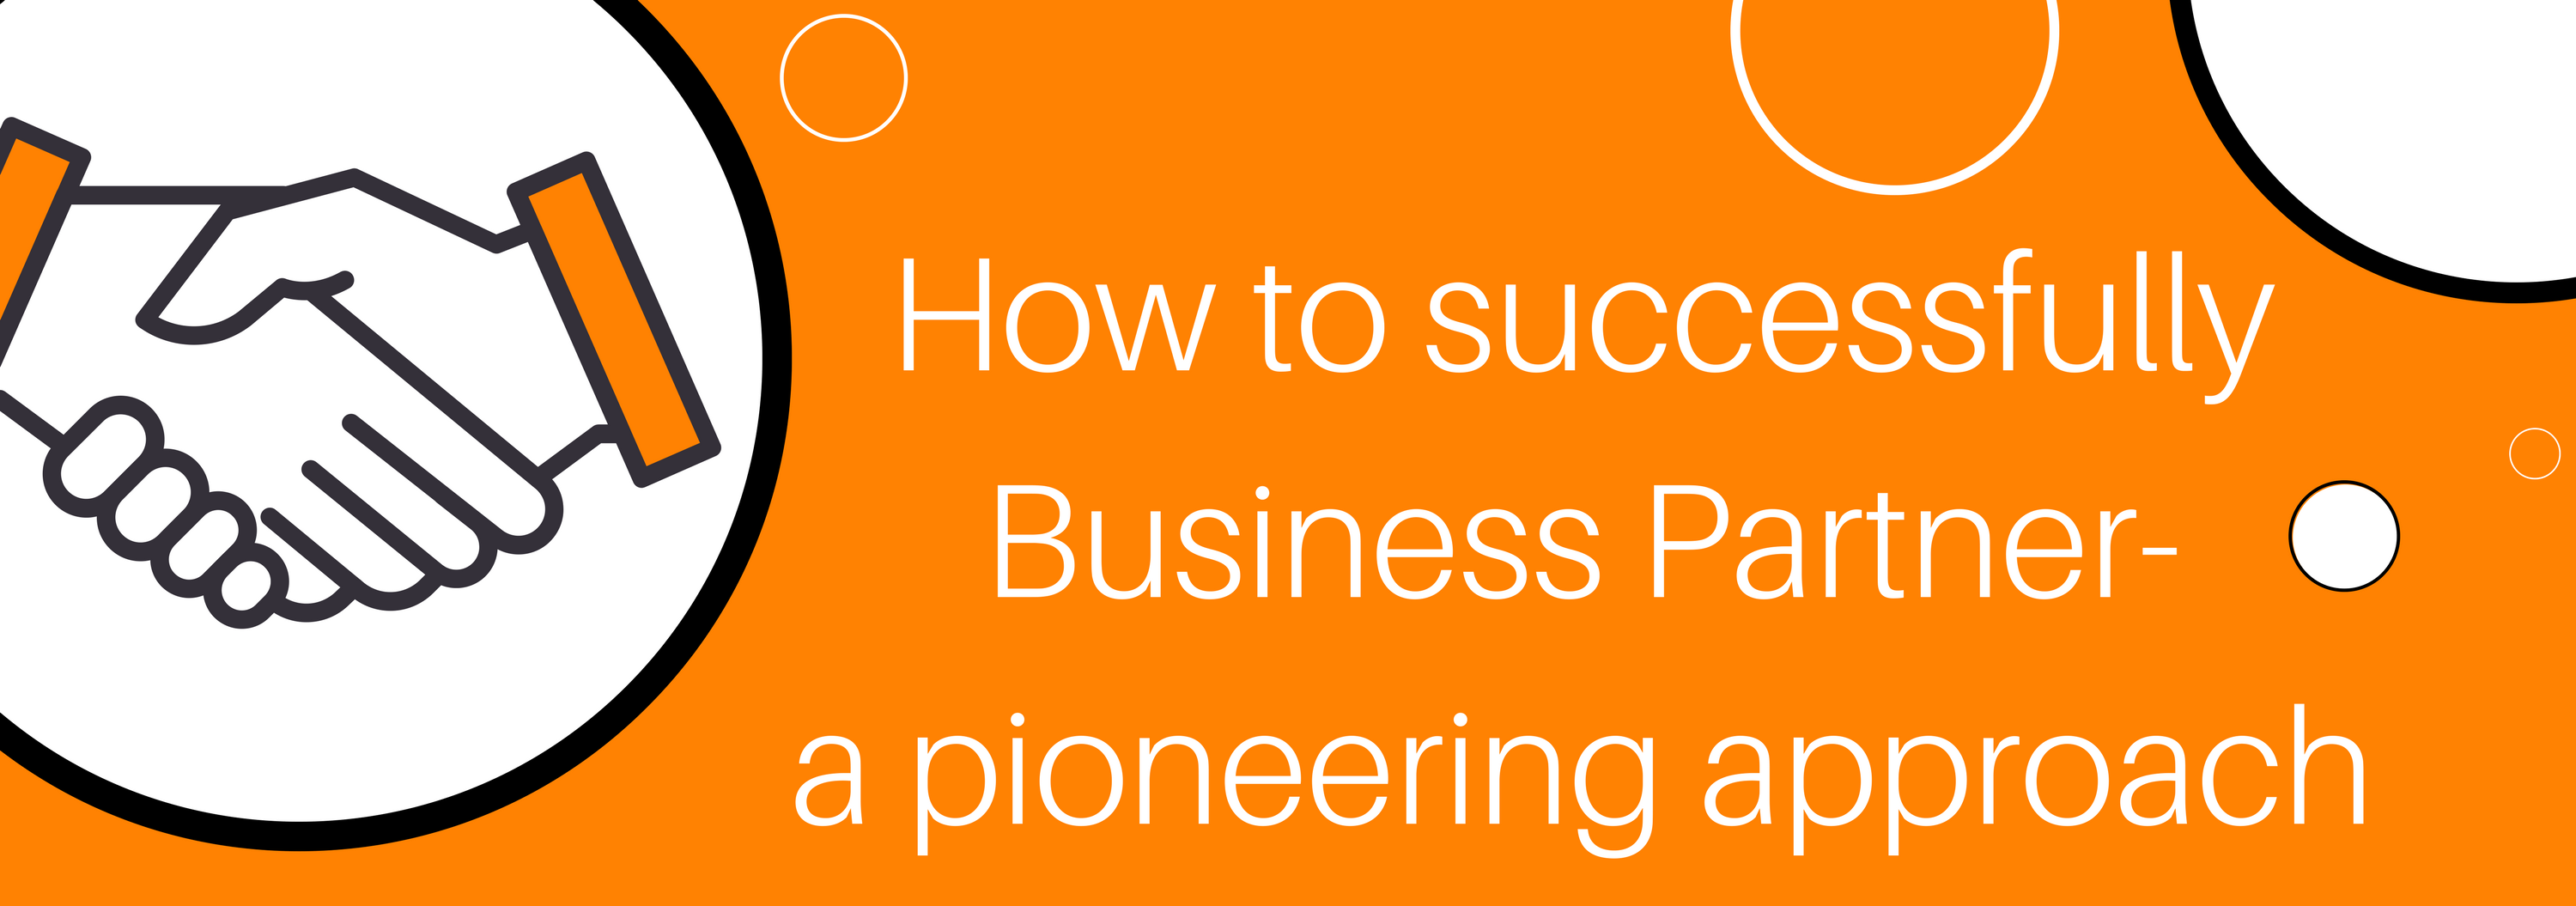 How to successfully Business Partner 